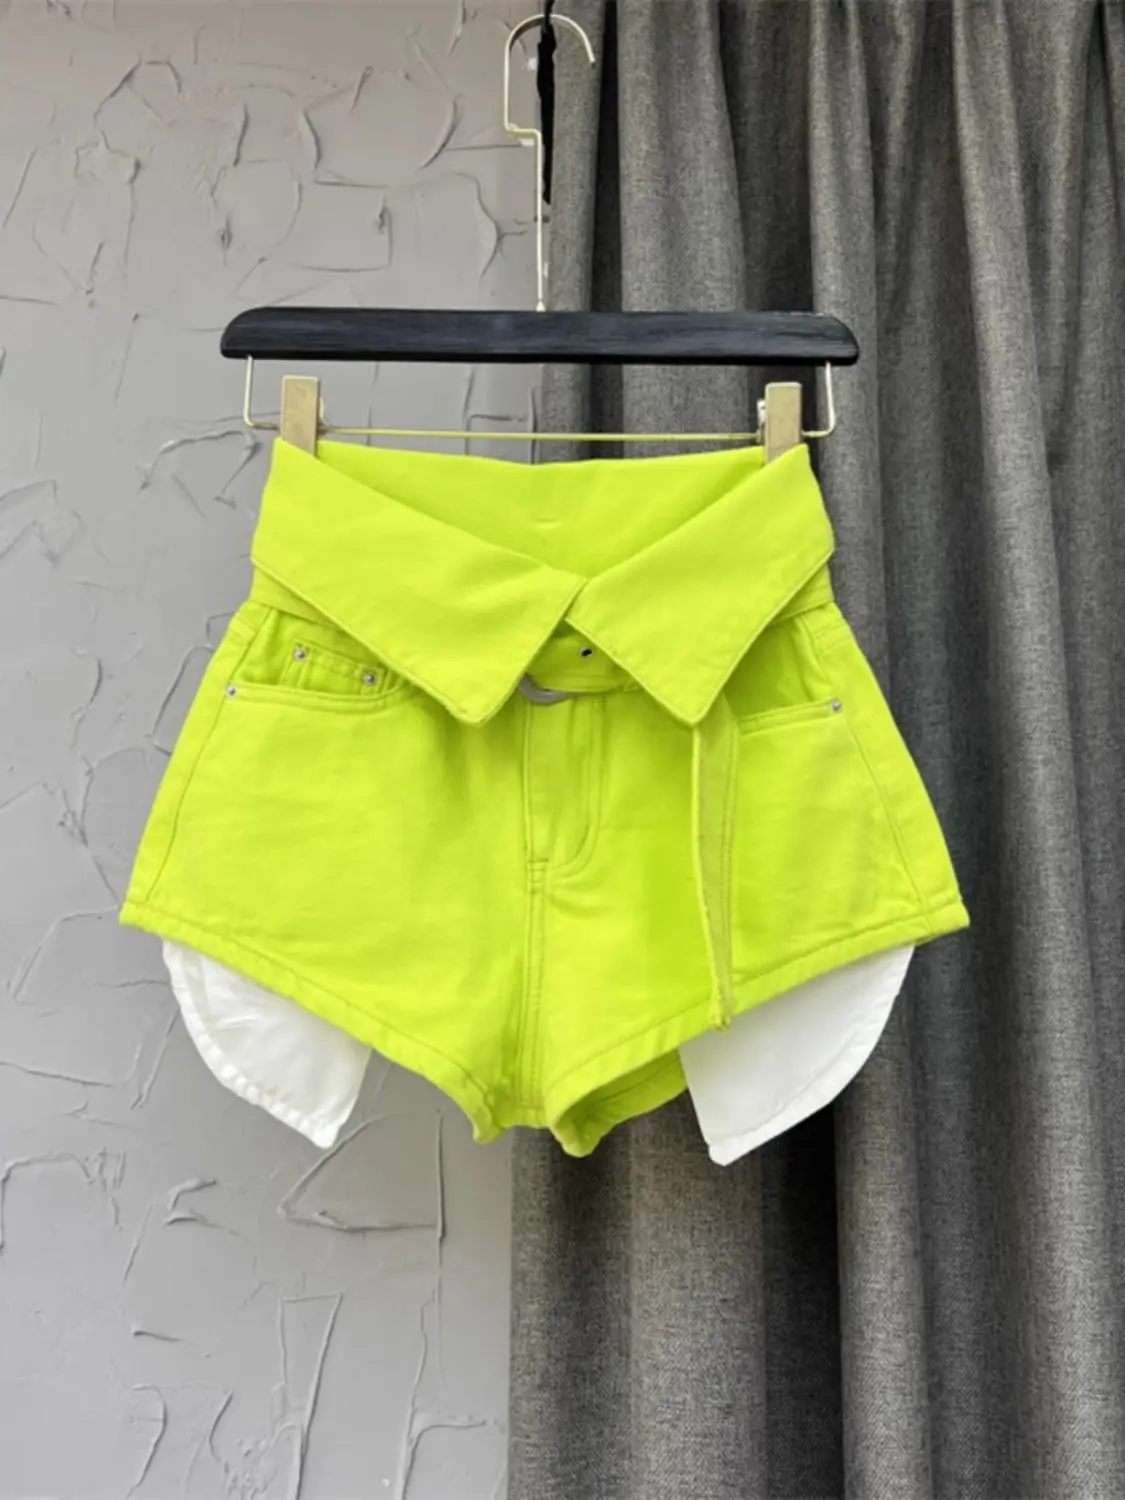 

Denim Shorts Cuffed Fluorescent Color Exposed Pockets Fashionable Western Design High Waist A Line Shorts Hot Pants For Women